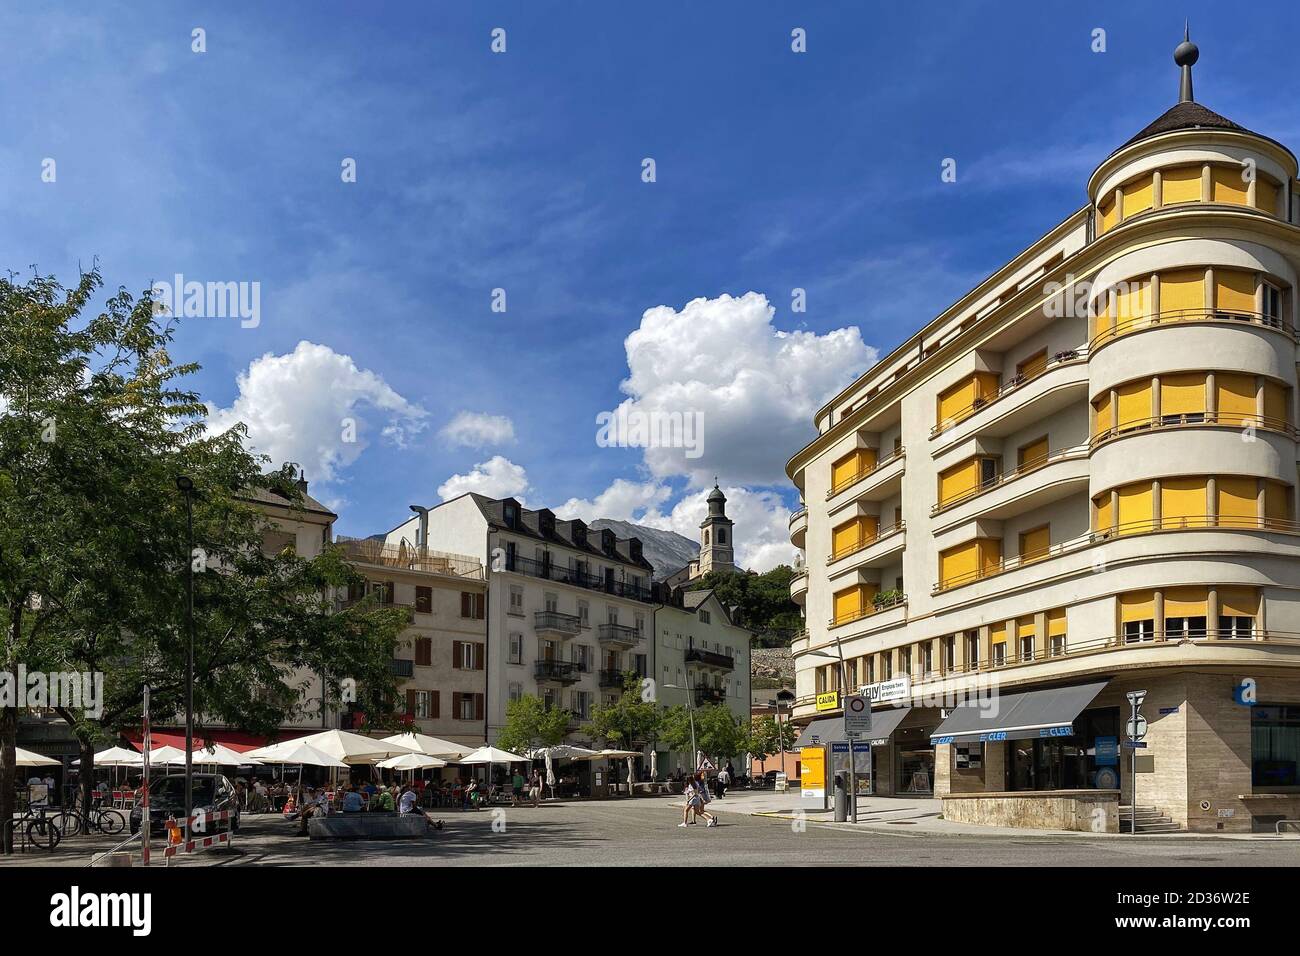 Sion, Switzerland, July 25: Citizens and visitors to the city relax in the shade of trees and on the terraces of cafes in one of the city squares on a Stock Photo